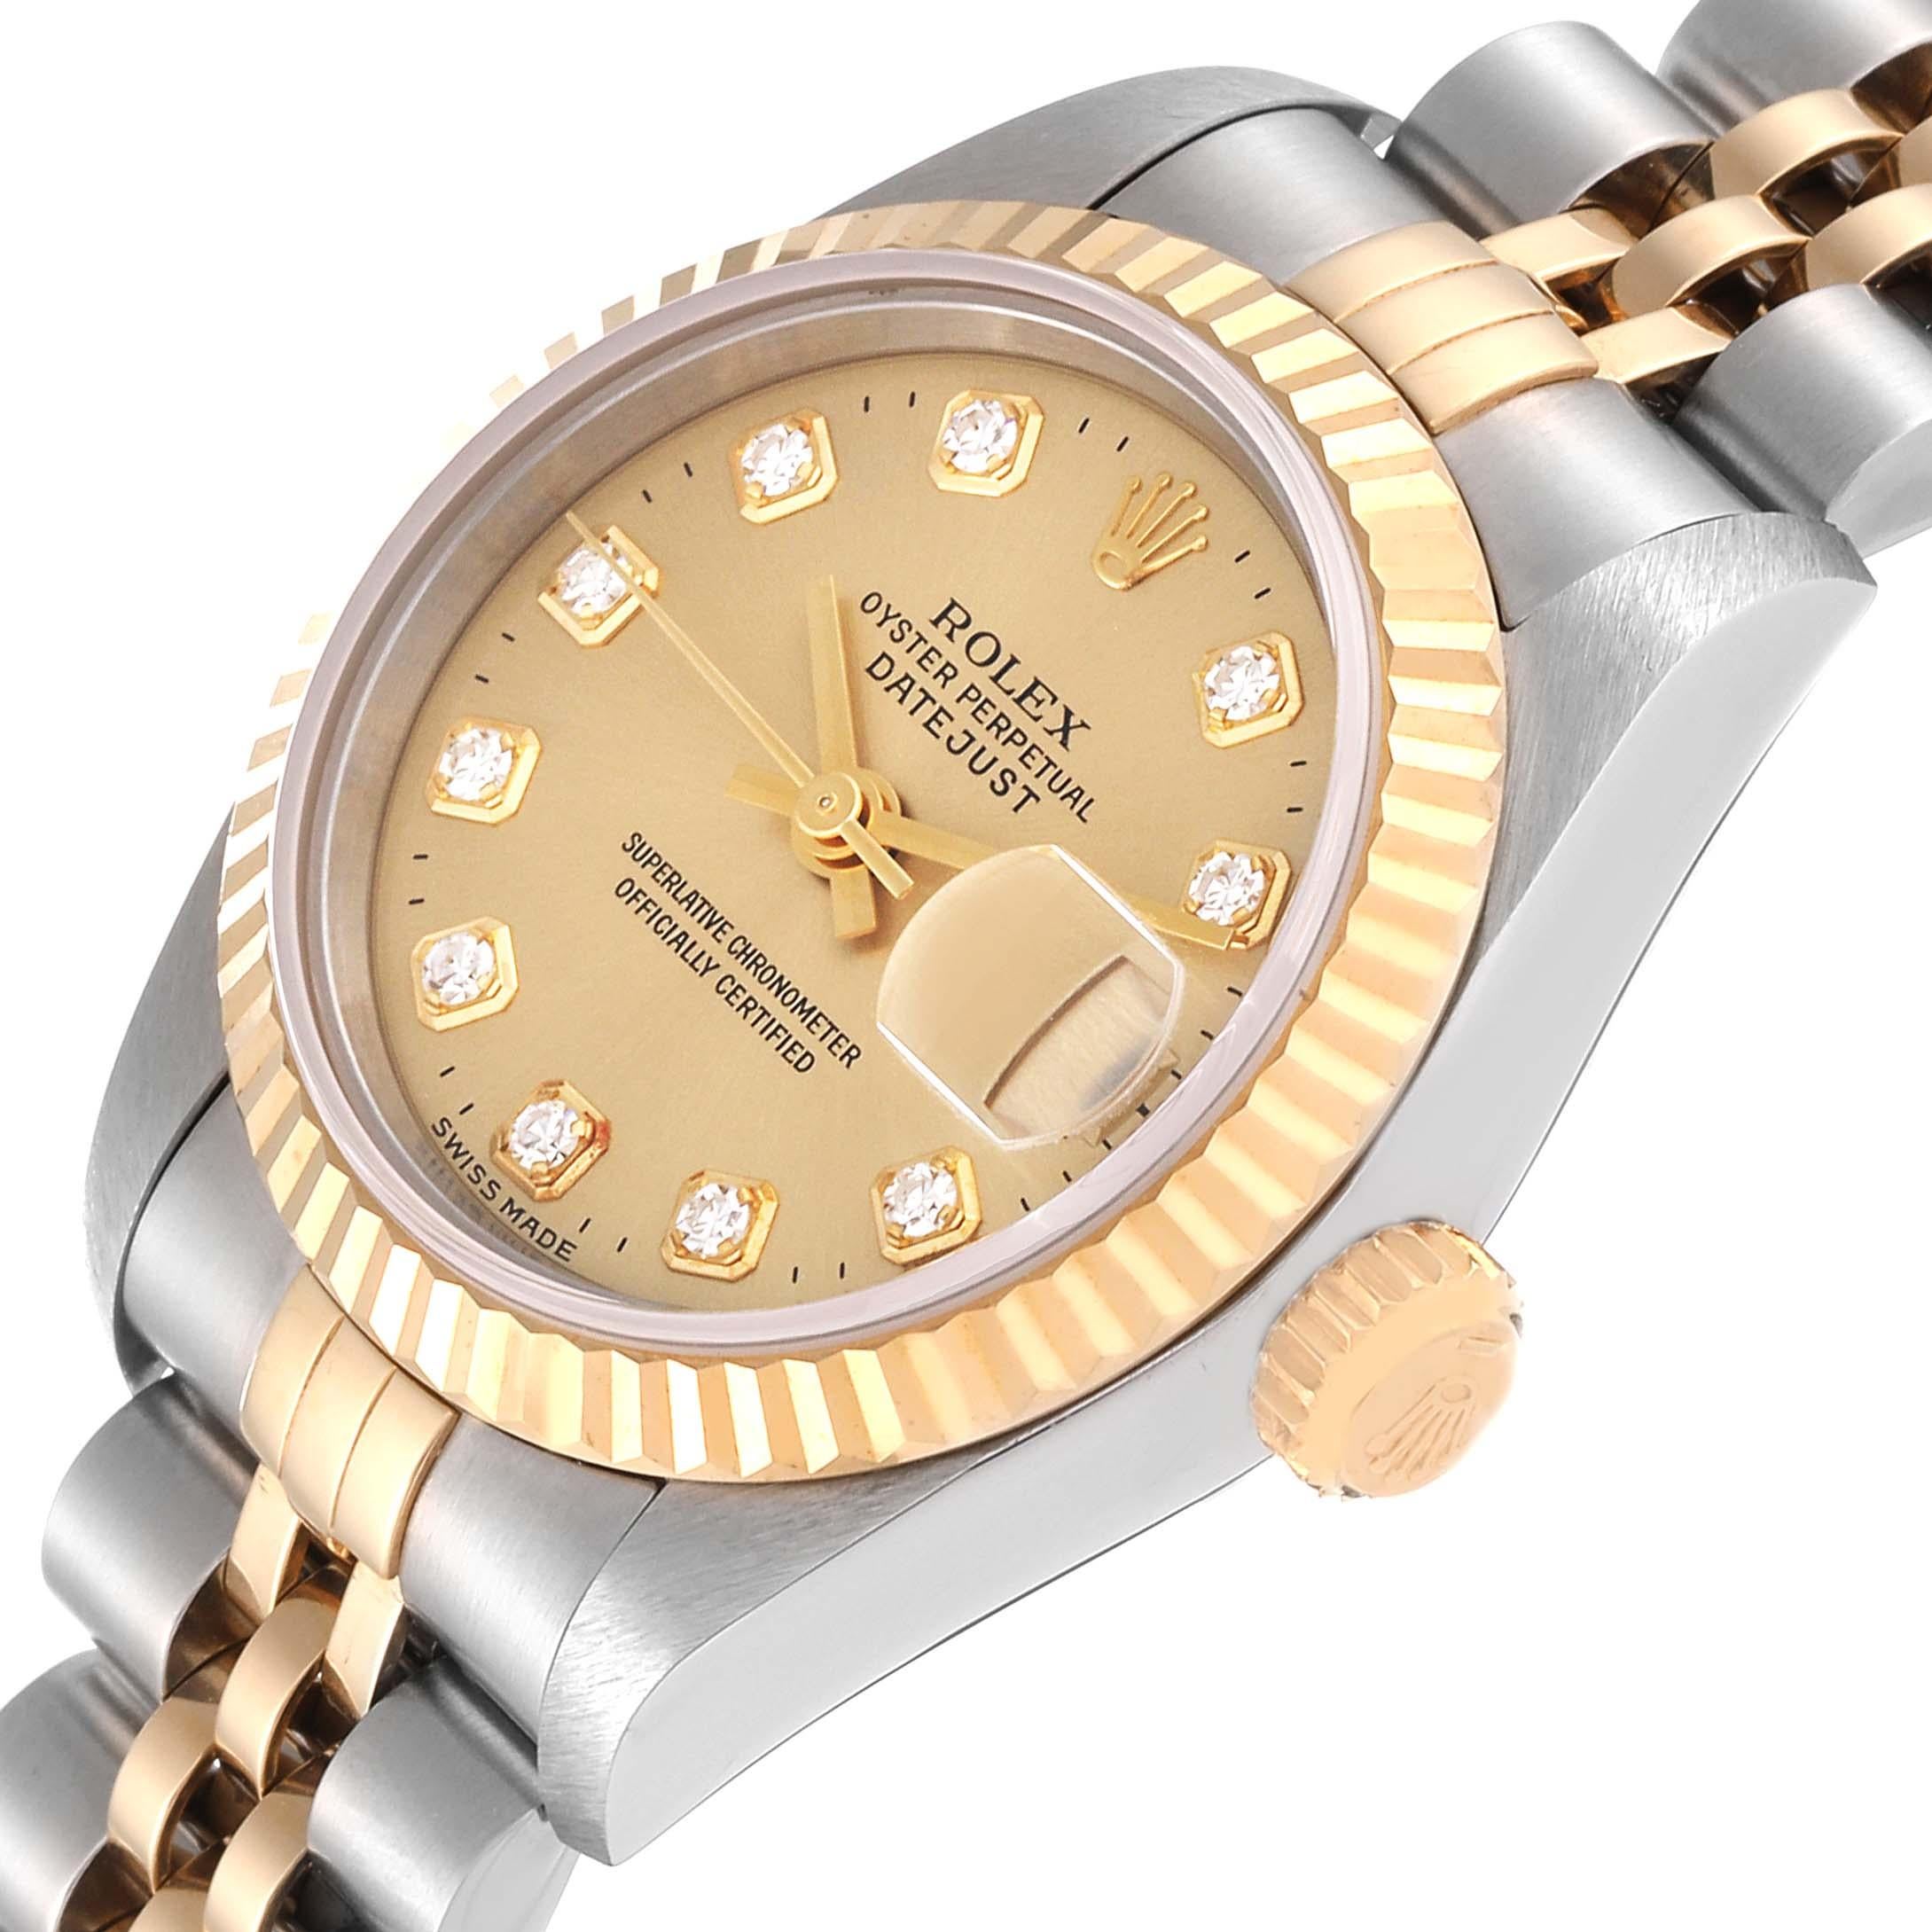 Rolex Datejust Diamond Dial Steel Yellow Gold Ladies Watch 69173 For Sale 2